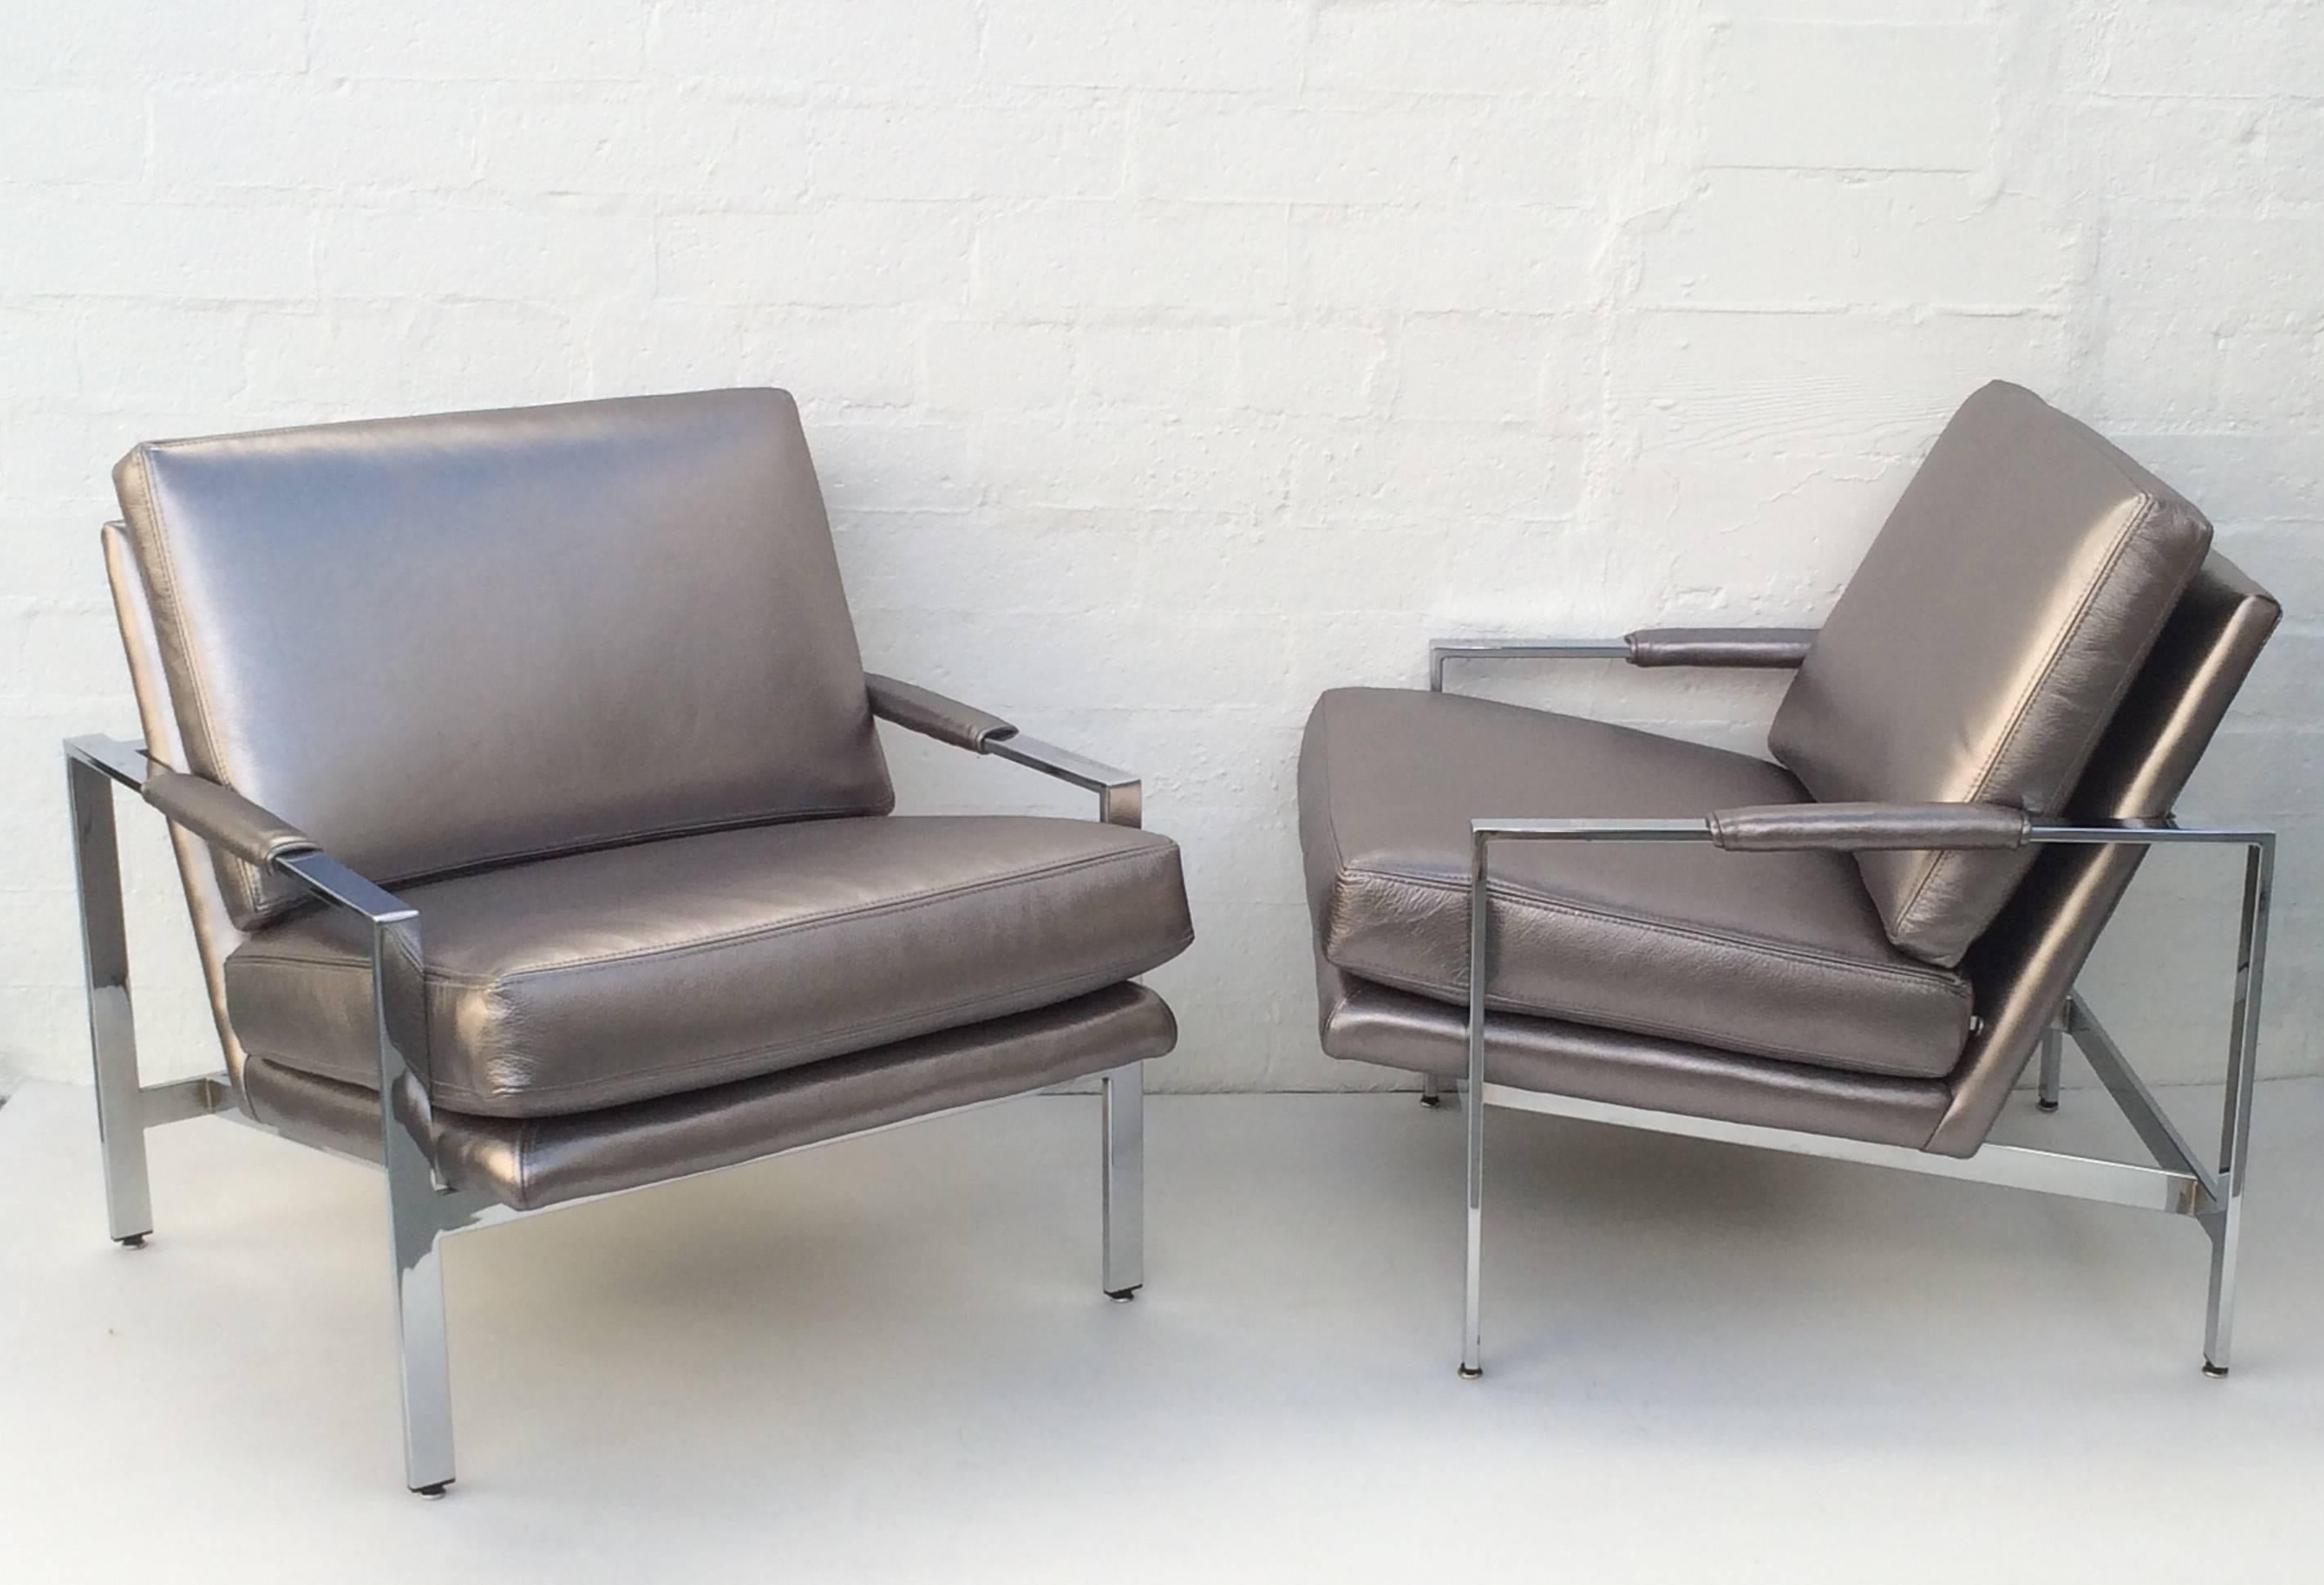 American Chrome and Leather Lounge Chairs by Milo Baughman for Thayer Coggin